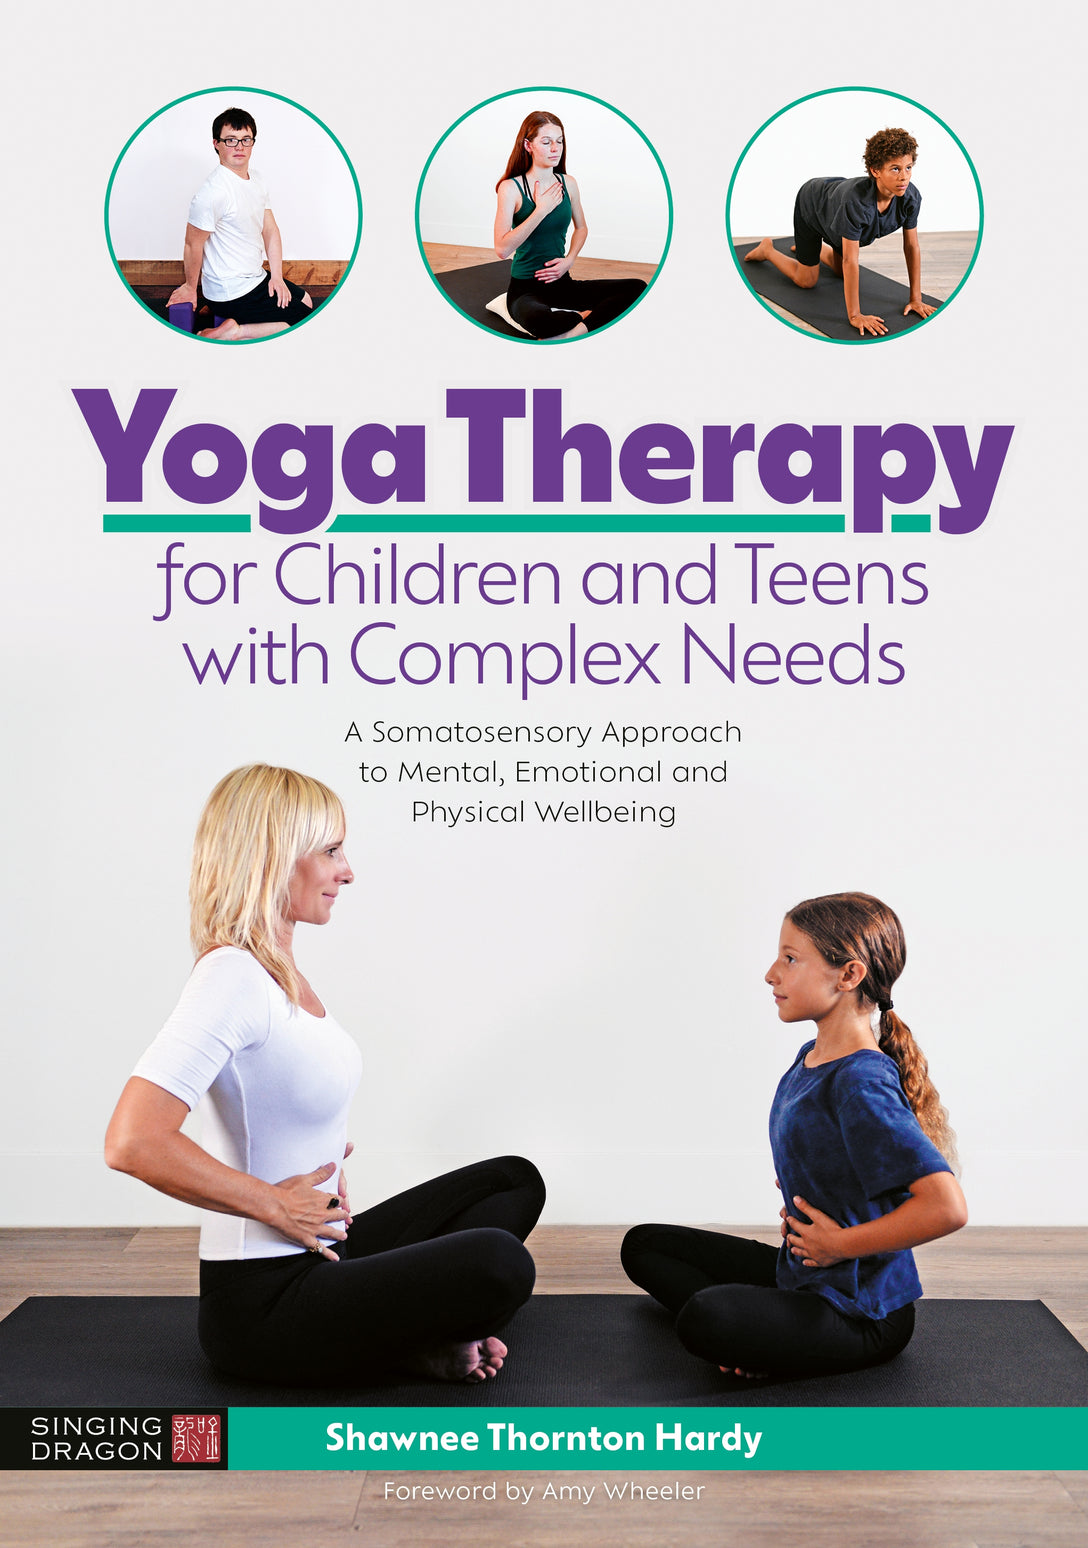 Yoga Therapy for Children and Teens with Complex Needs by Shawnee Thornton Thornton Hardy, Amy Wheeler